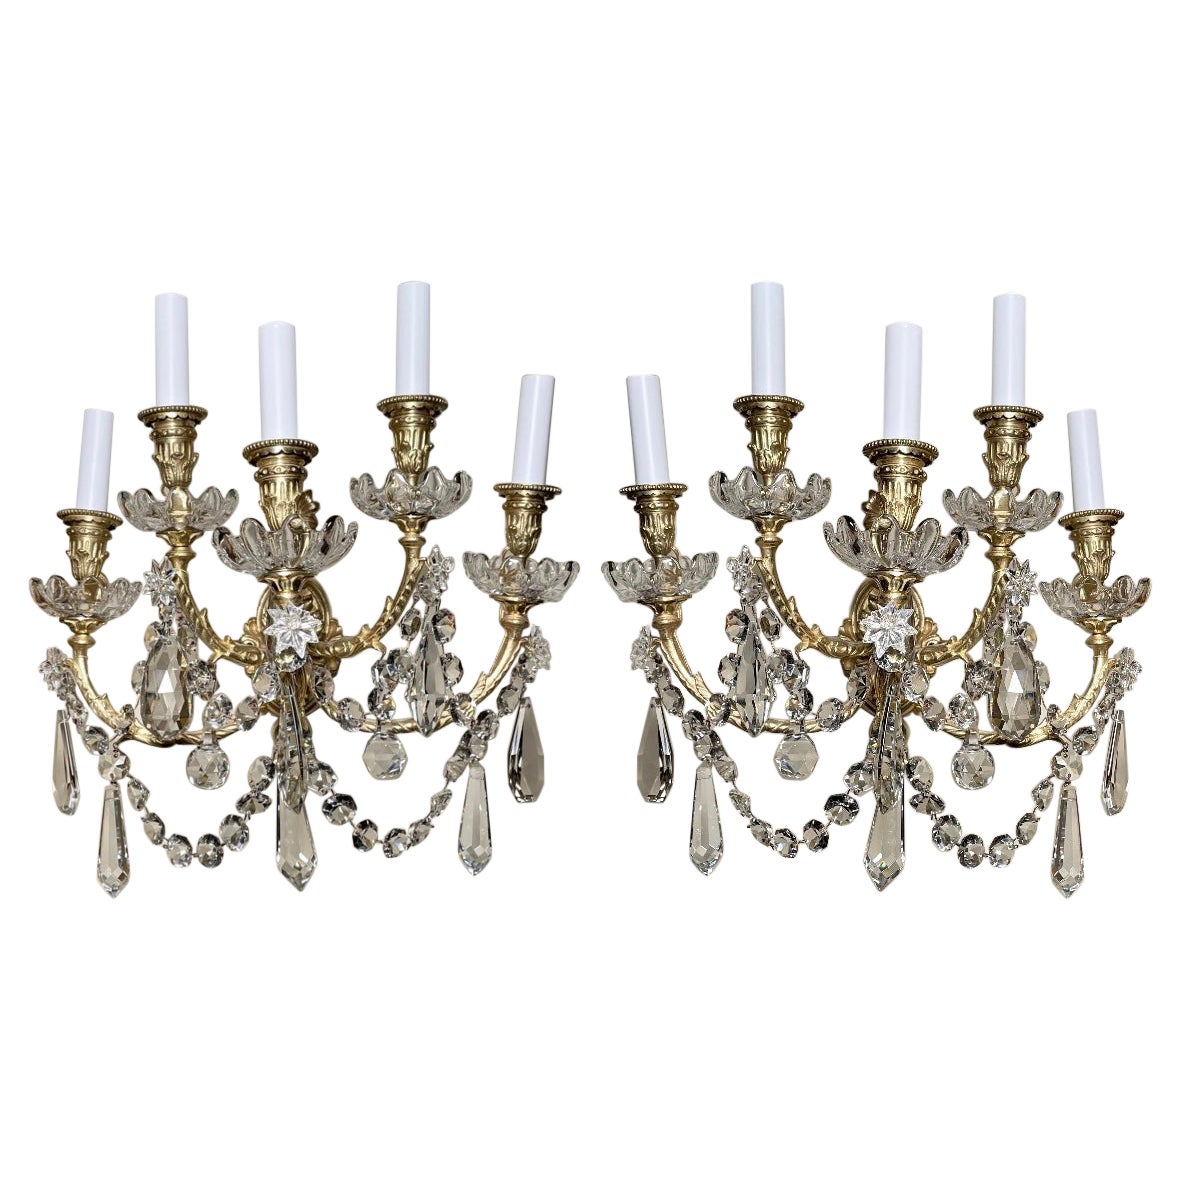 Pair Antique French Ormolu Bronze & Baccarat Crystal 5 Light Sconces, Circa 1890 For Sale